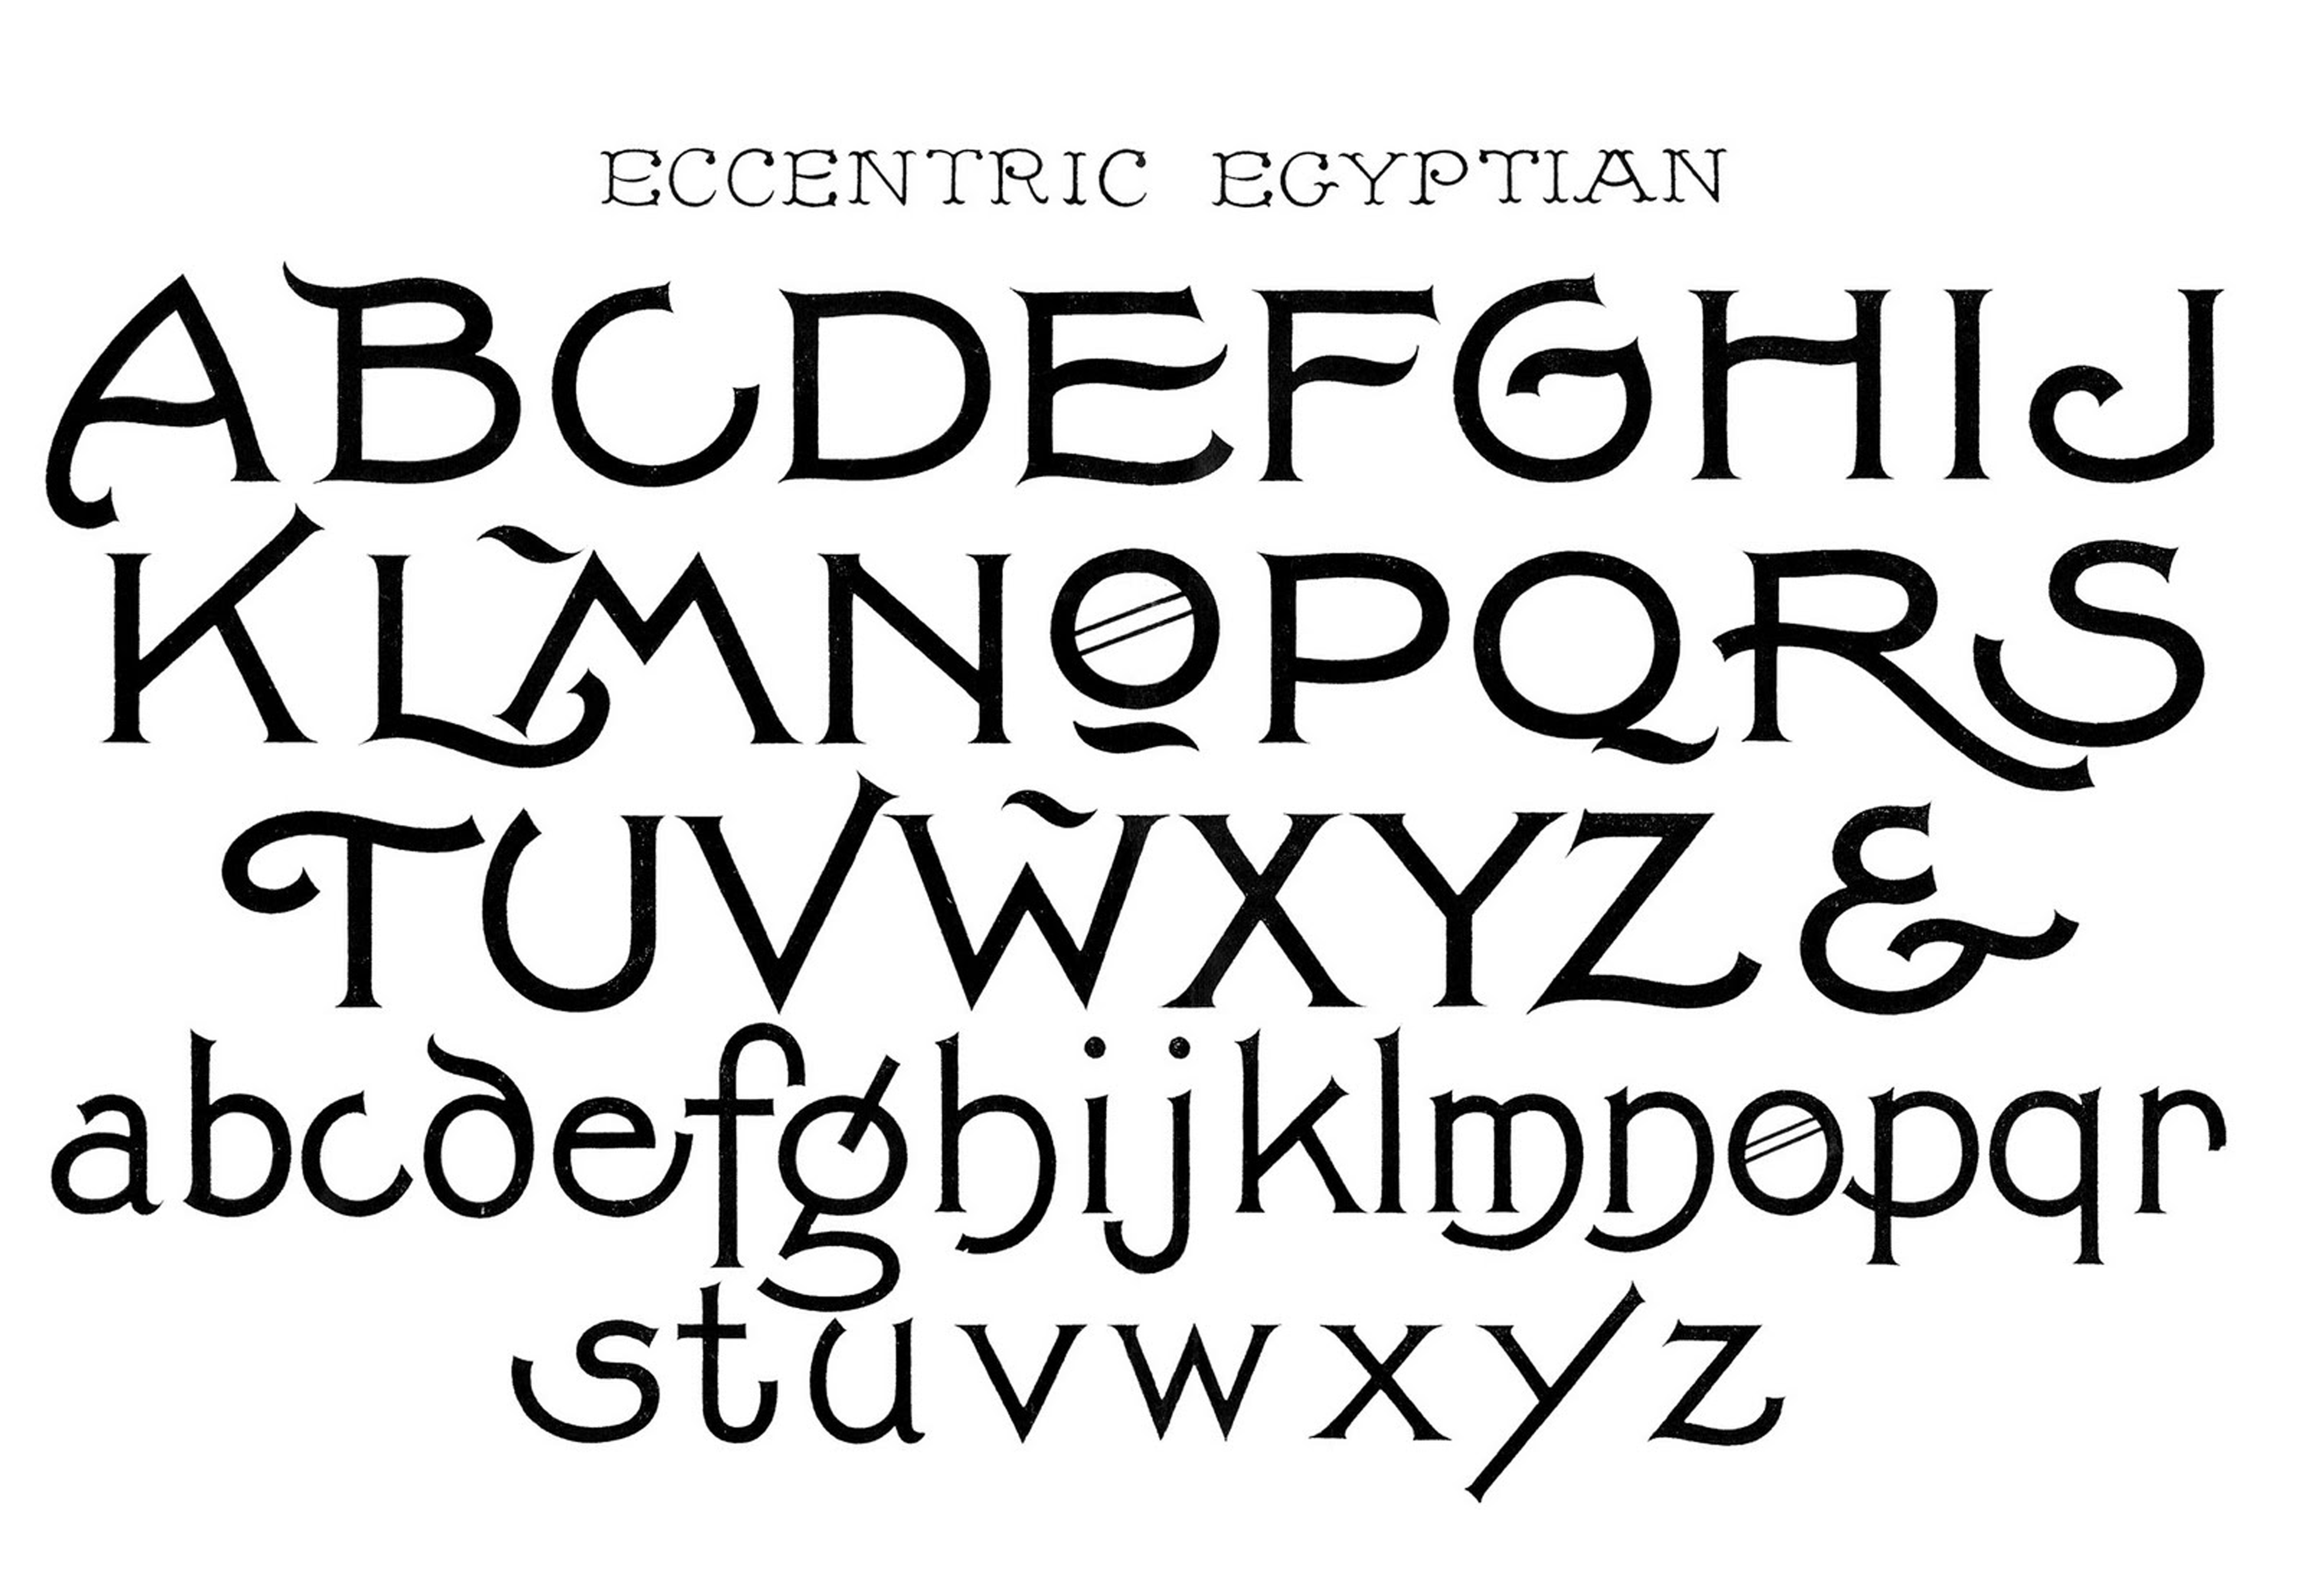 Typography fonts, Typography alphabet, Lettering